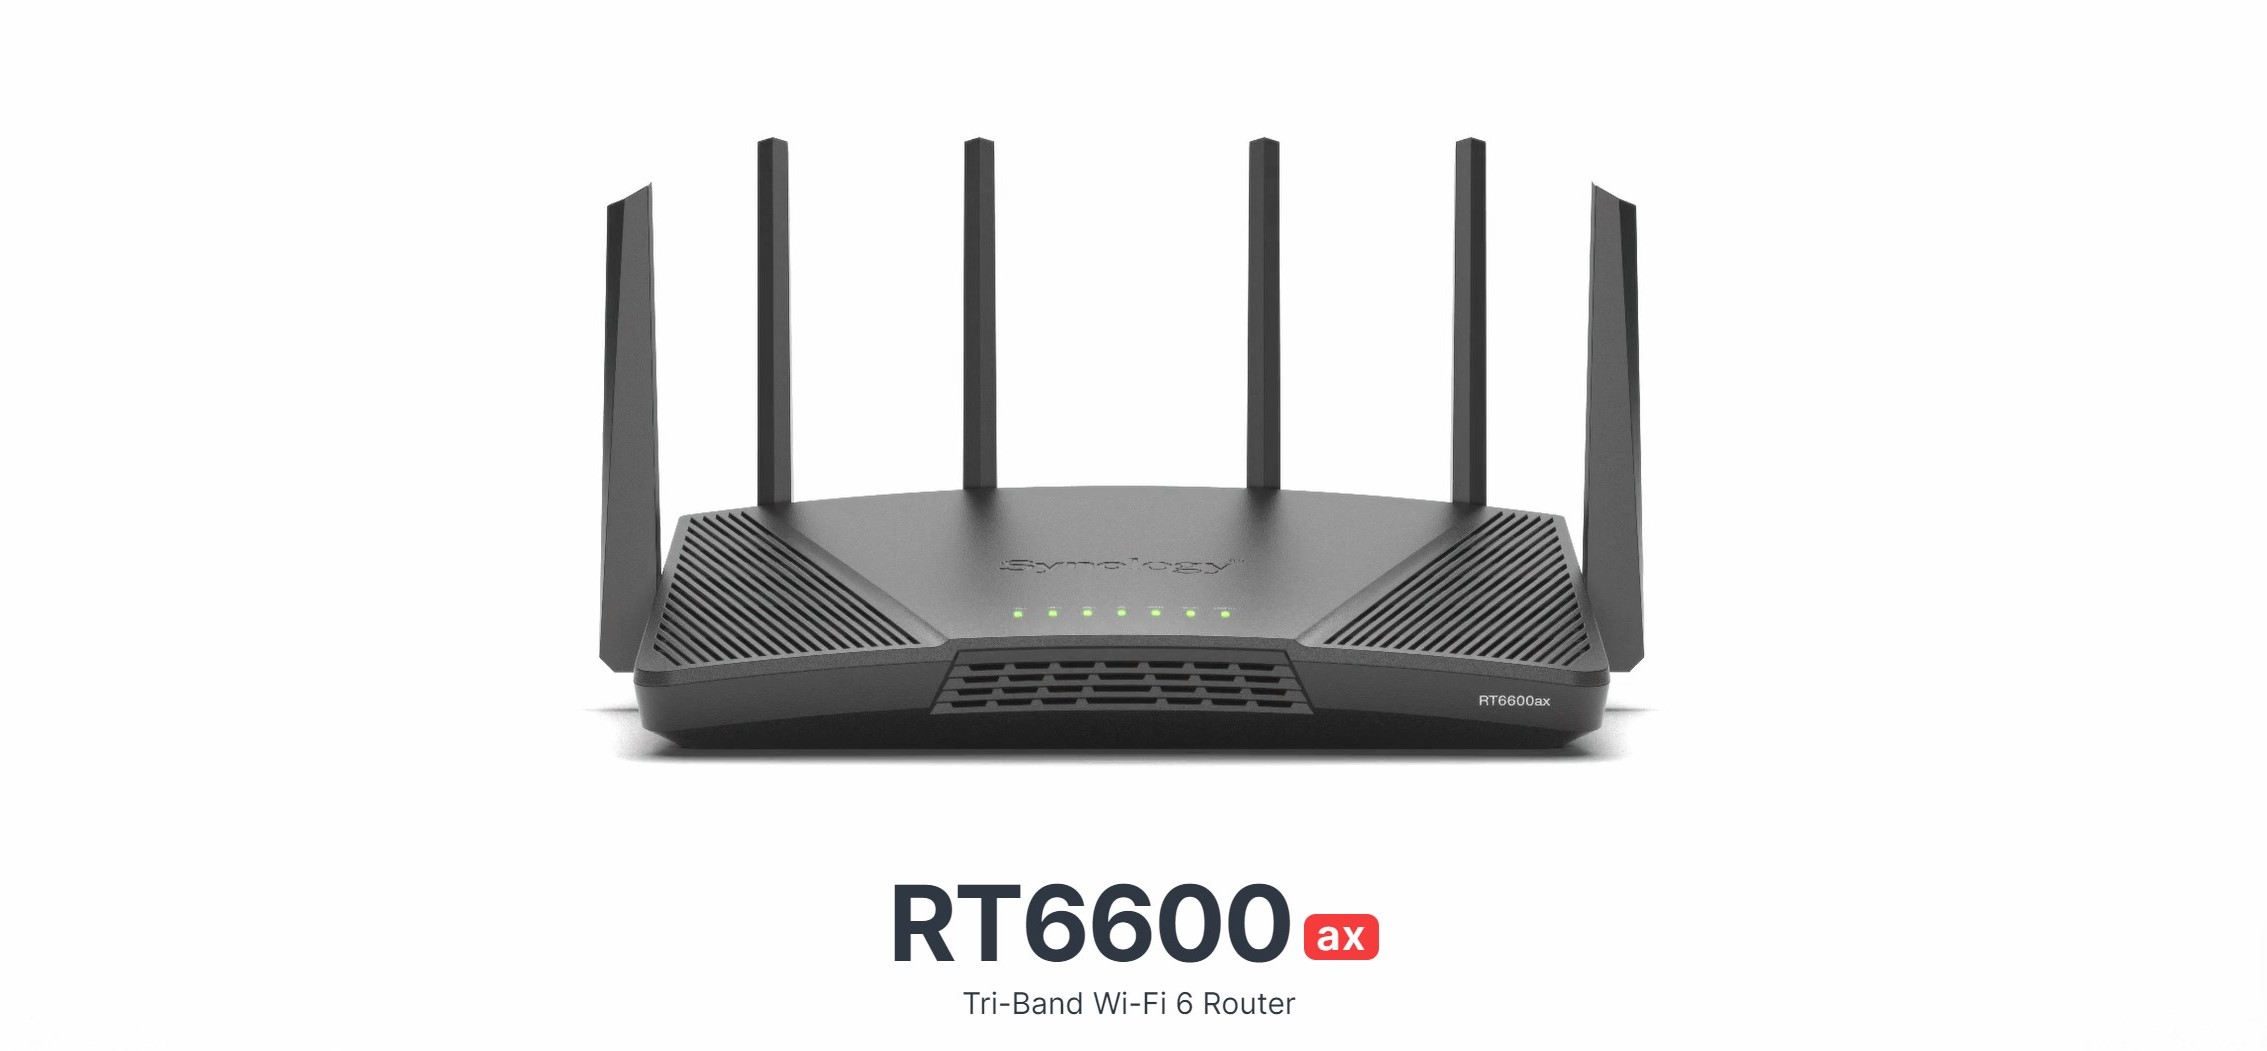 Synology RT660ax router 